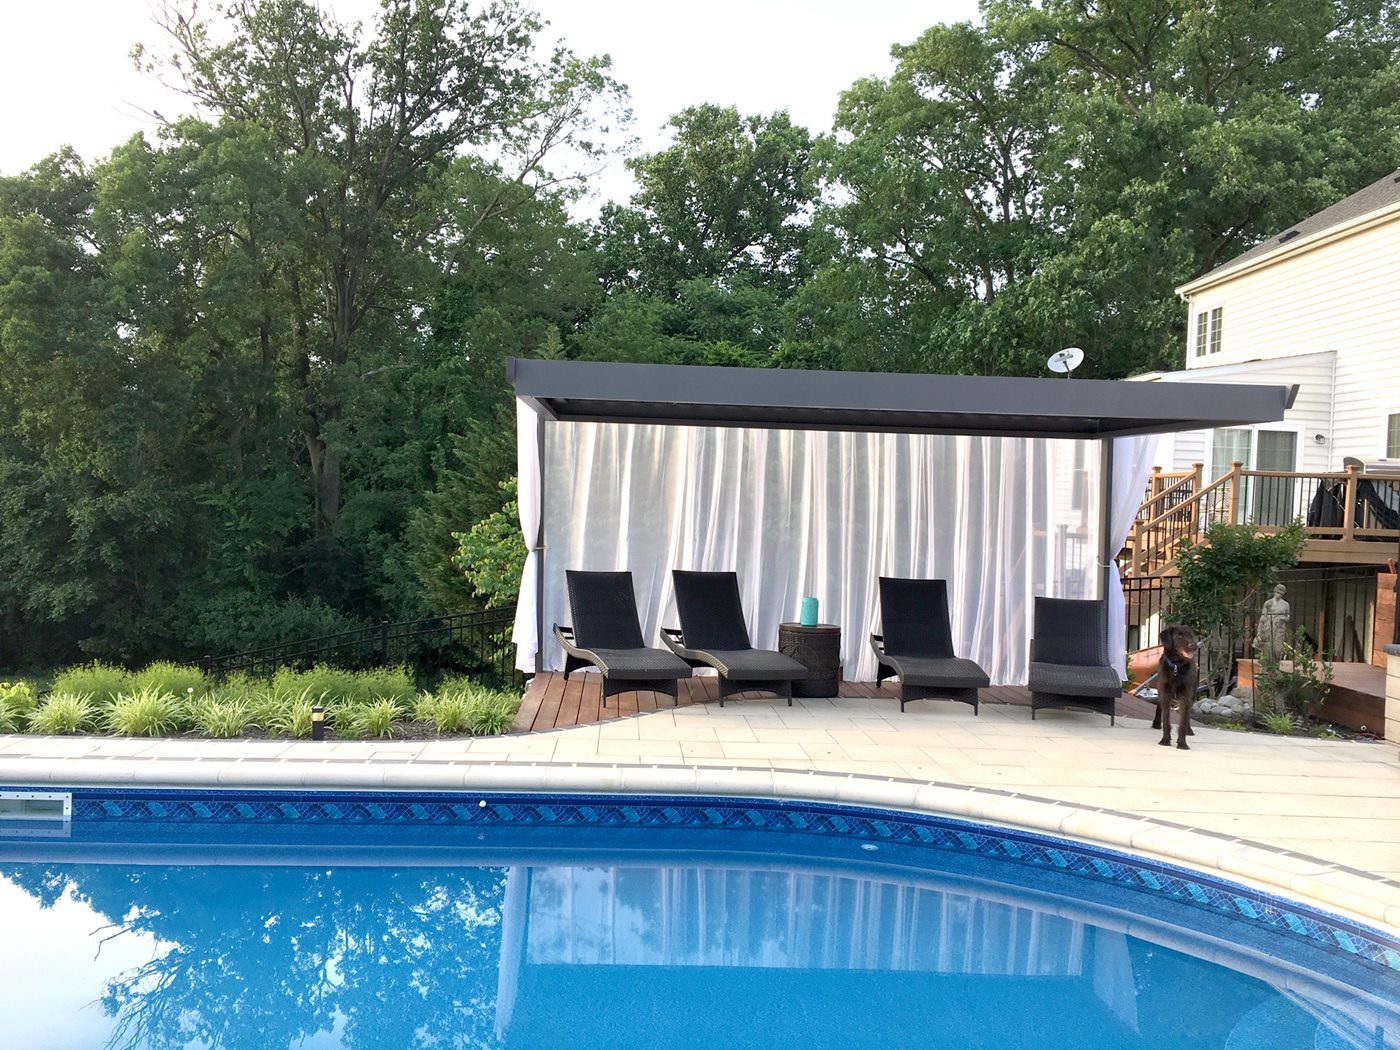 Poolside-Custom-Alba-at-Maryland-Residence-by-The-Deck-Awning-Co-(2).jpg